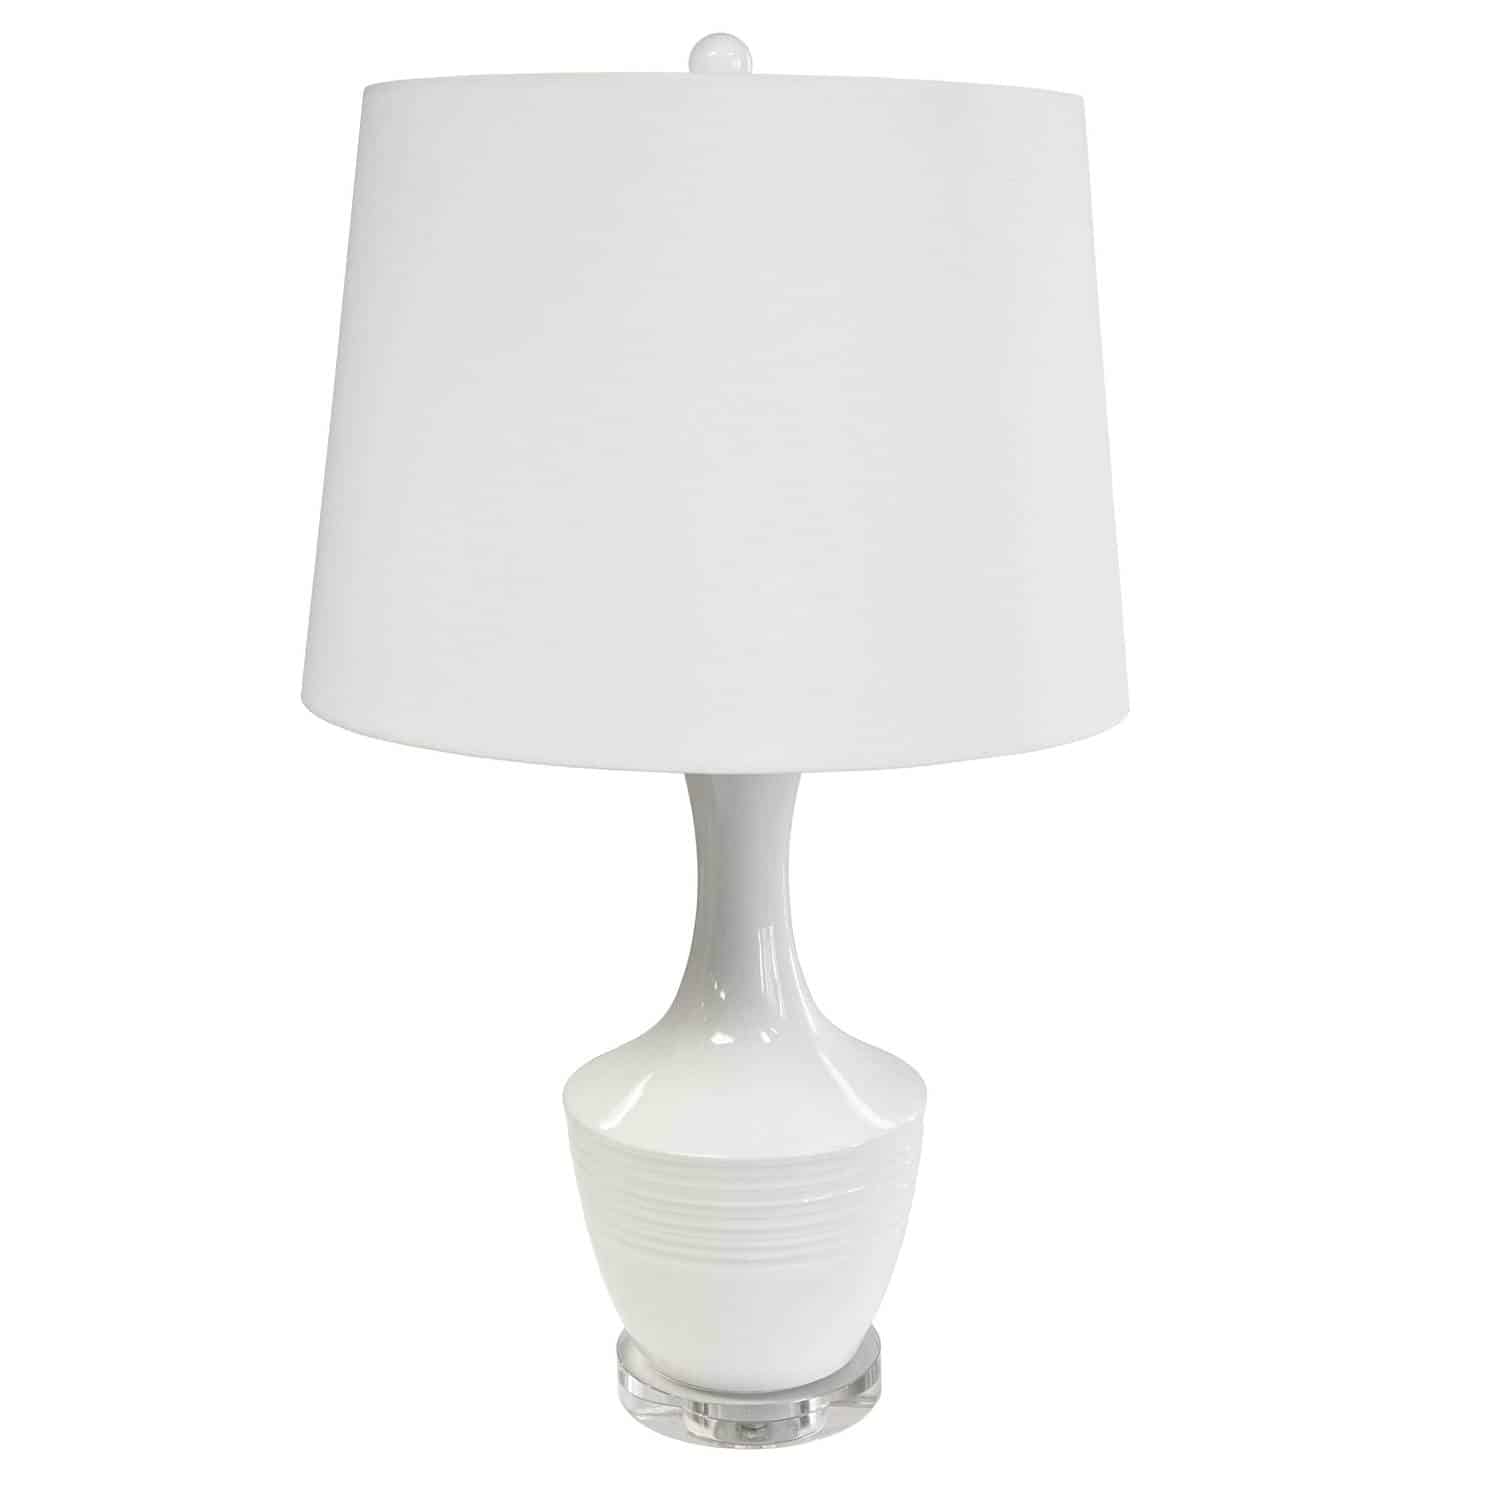 1LT Incandescent Table Lamp, WH w/ WH Shade